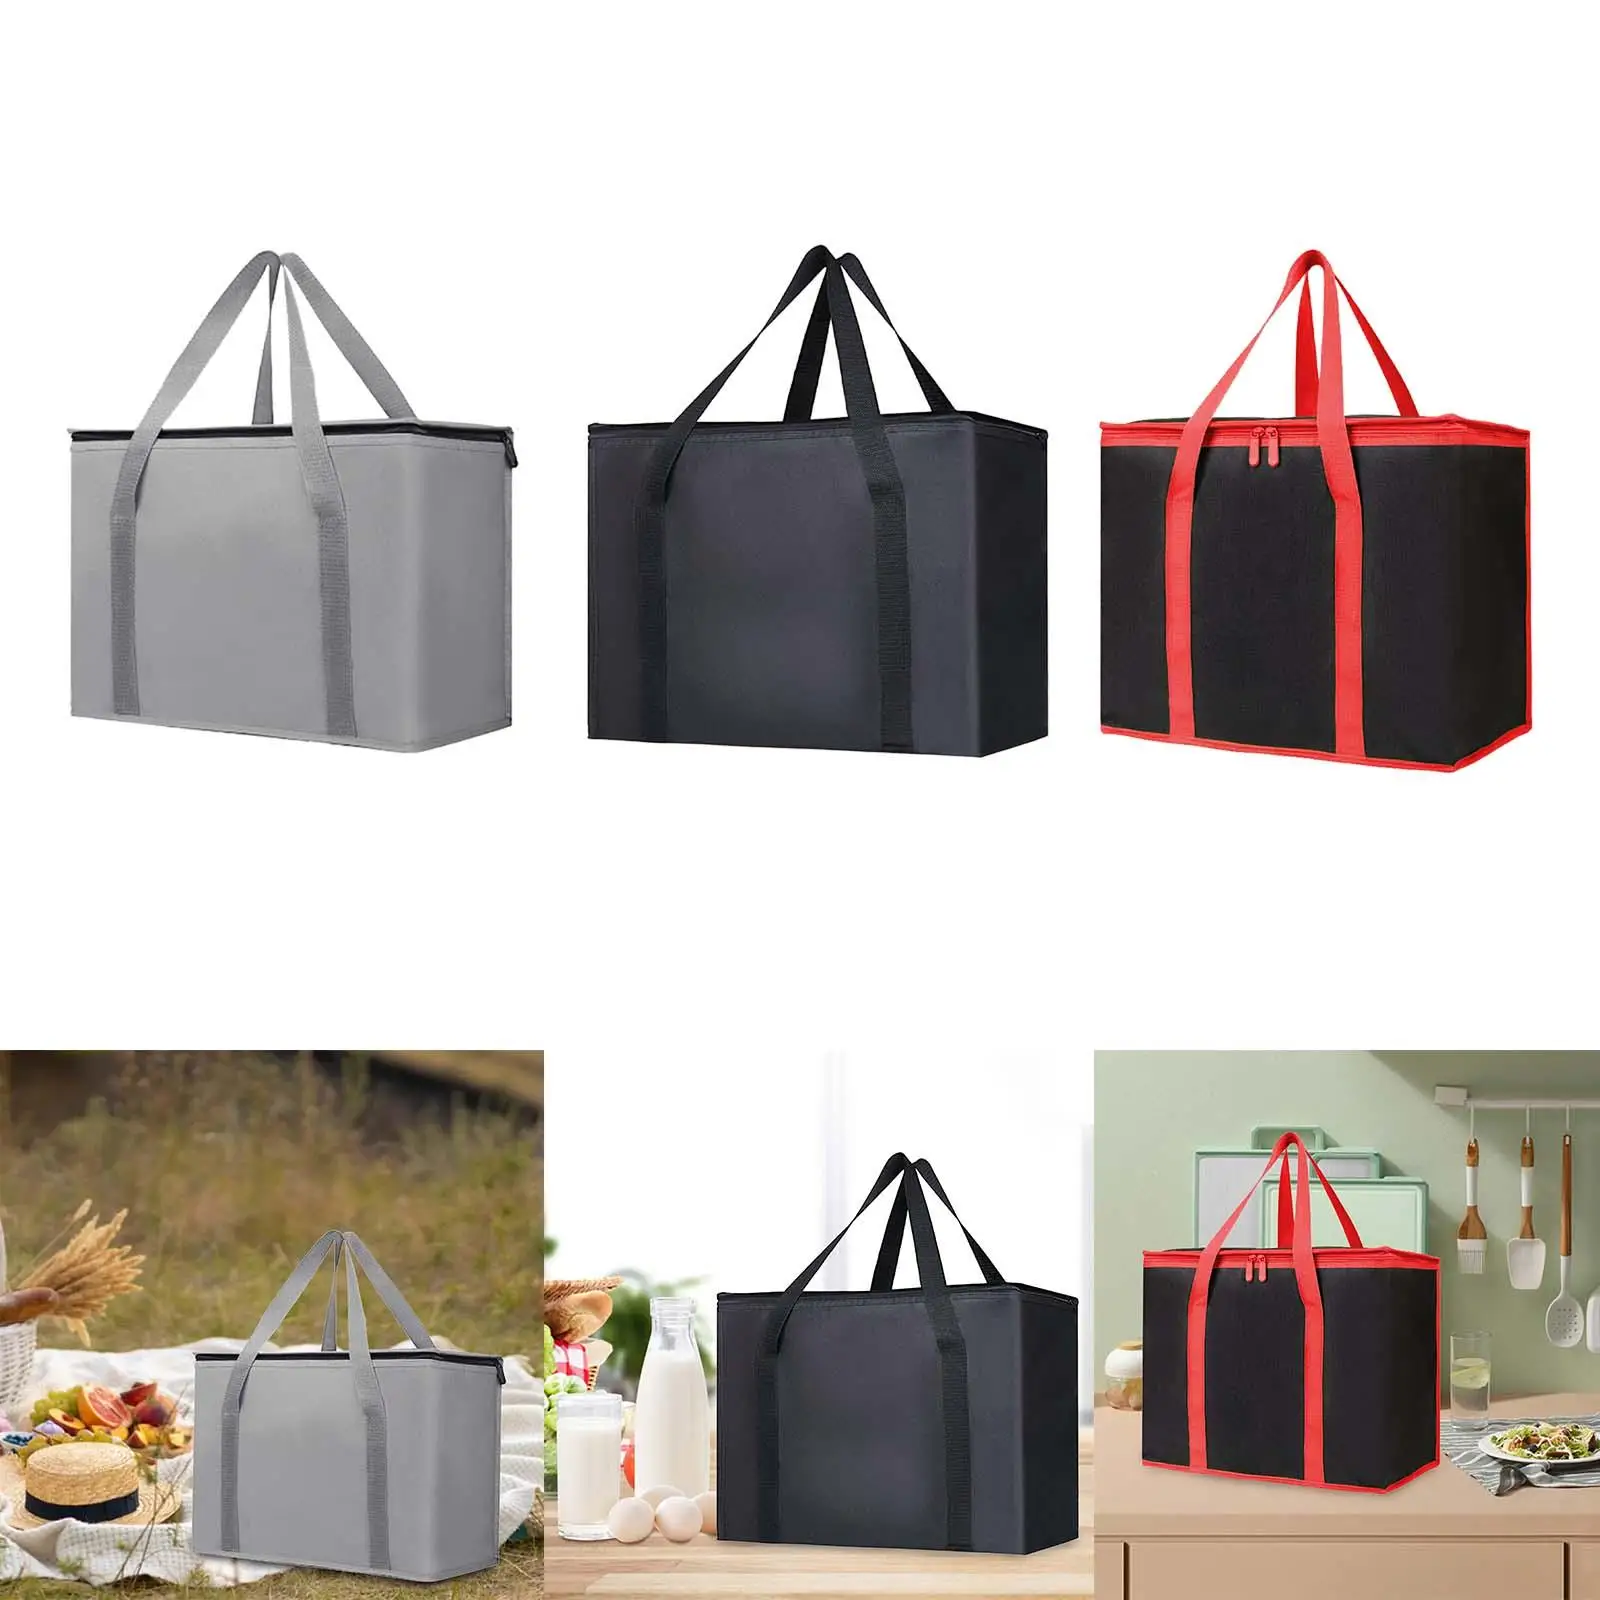 Insulated Cooler Bag Lightweight with Top Handle Thickened Insulated Picnic Bag for Picnic Camping Travel Festivals Hiking